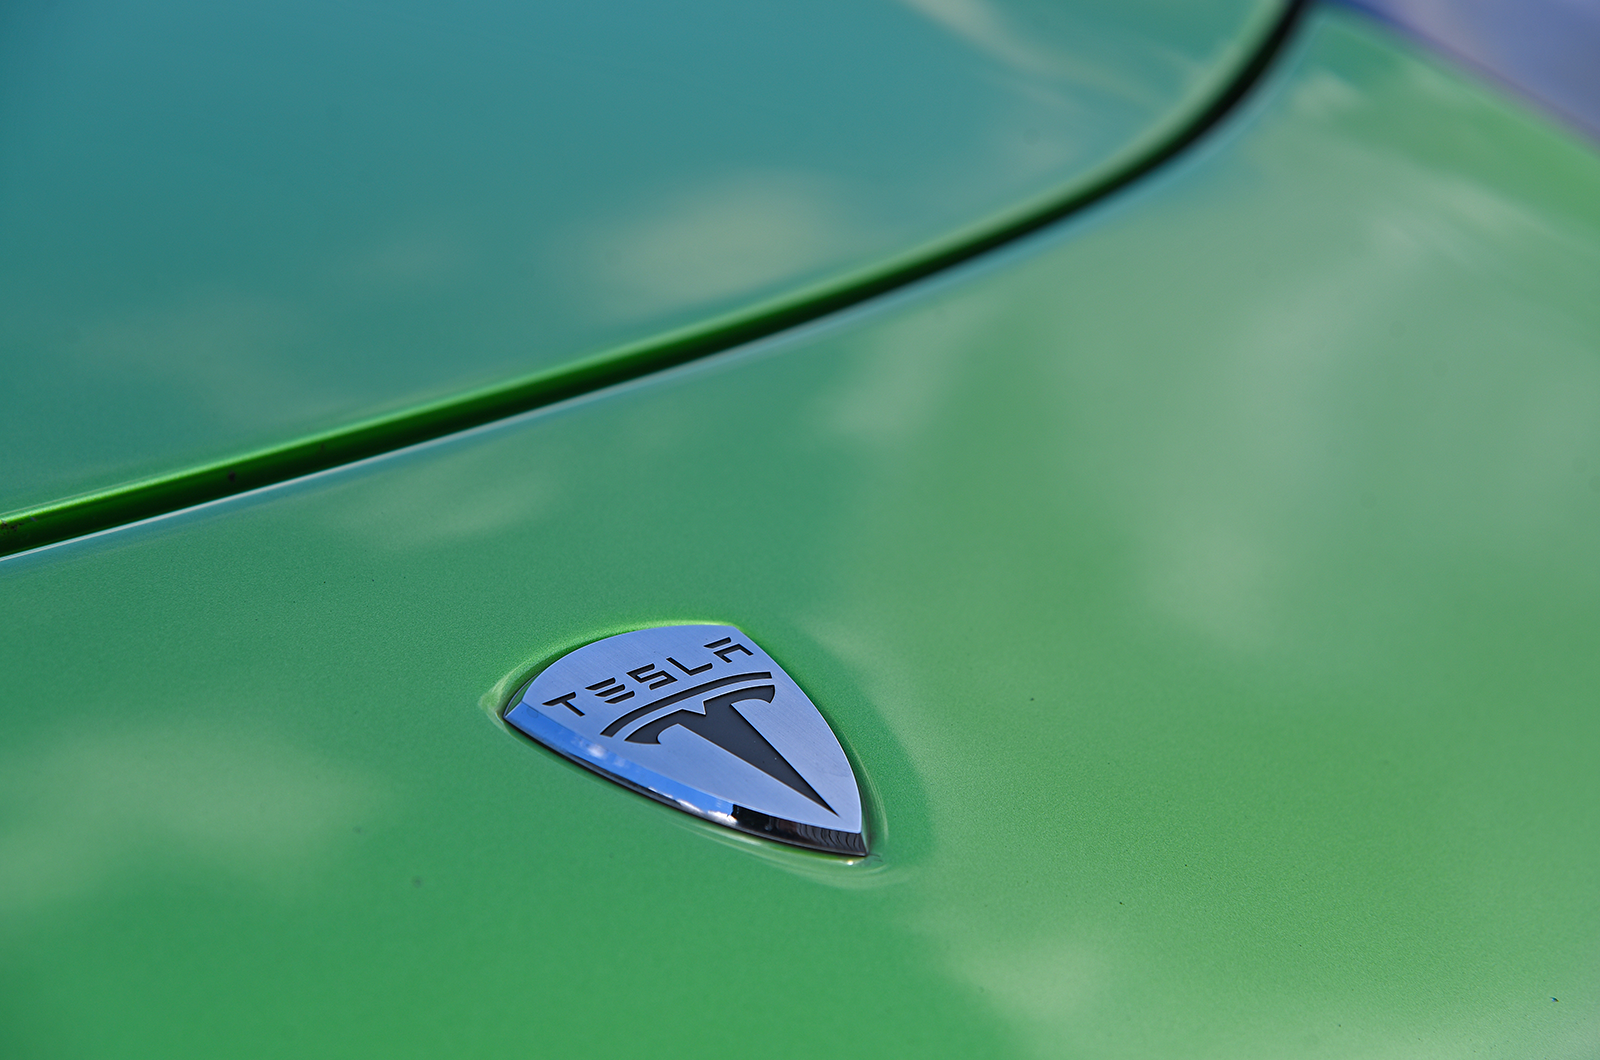 Classic & Sports Car – The green hornet: Tesla’s first electric endeavour